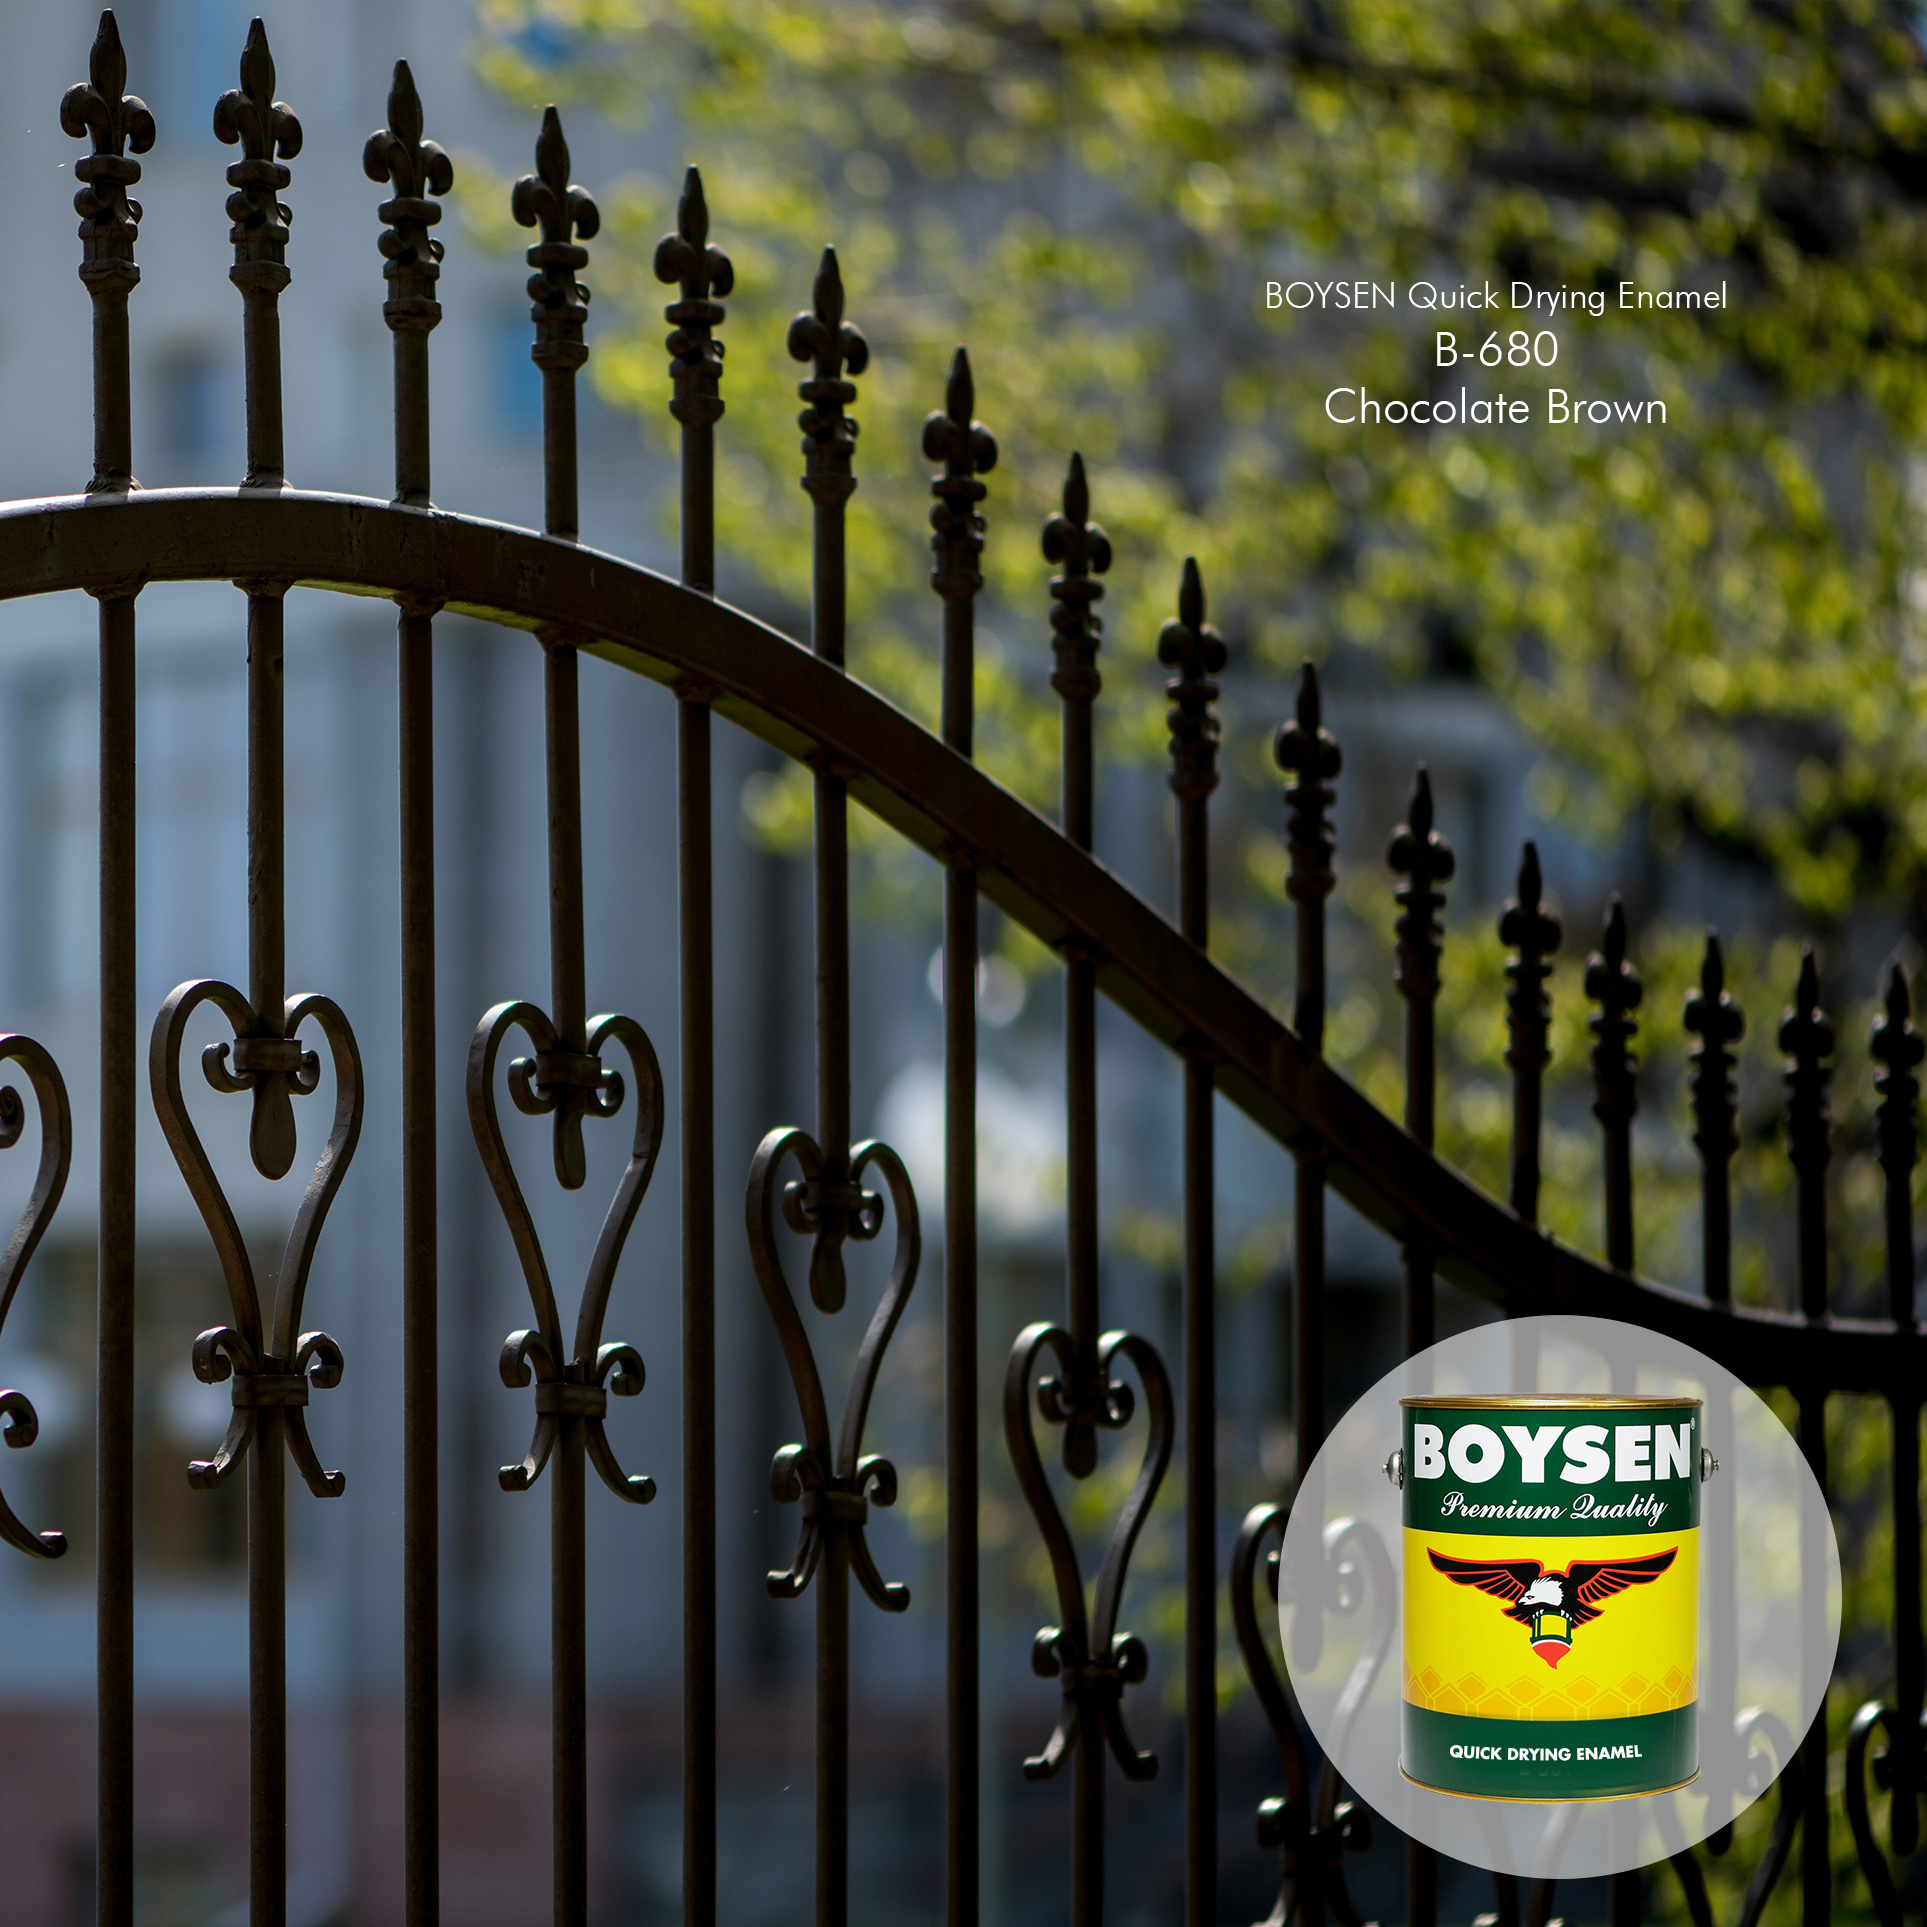 For Your Roof, Gate, and More: 5 Boysen Products that Protect from the Rain | MyBoysen